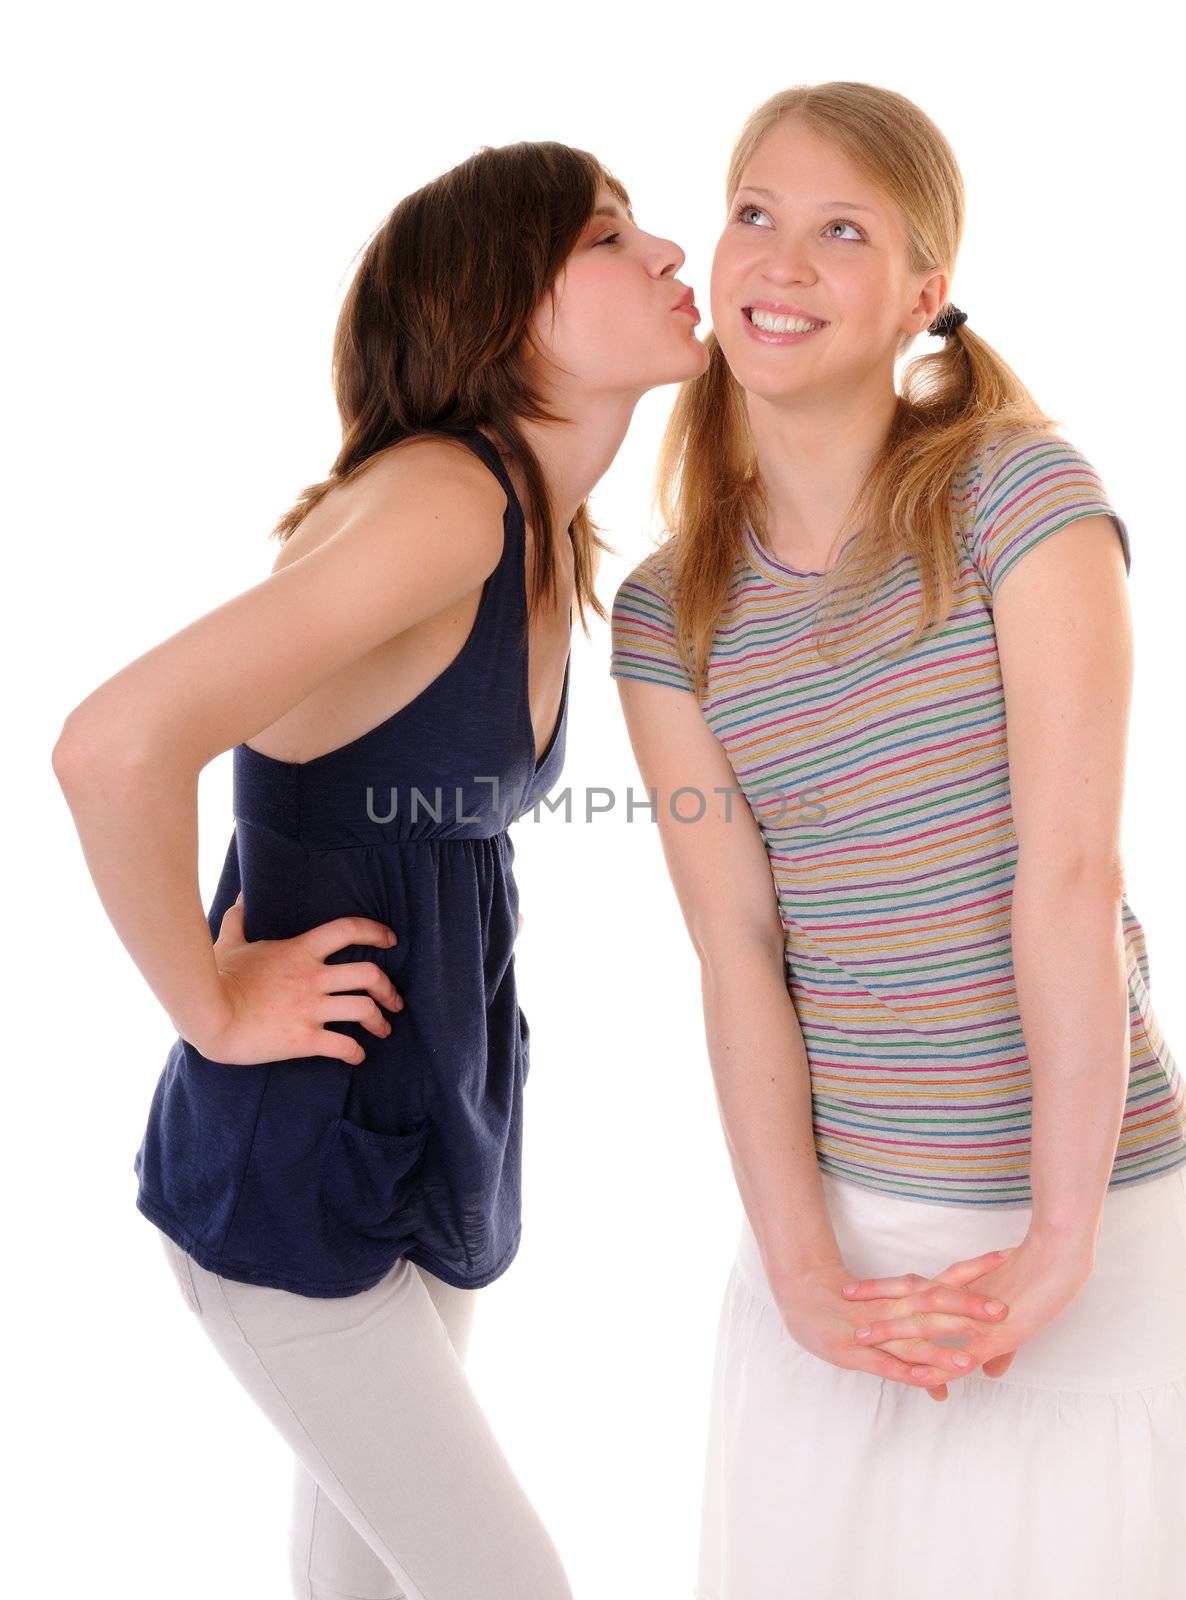 One young casual woman kiss in cheek another girl. Isolated on on white background.